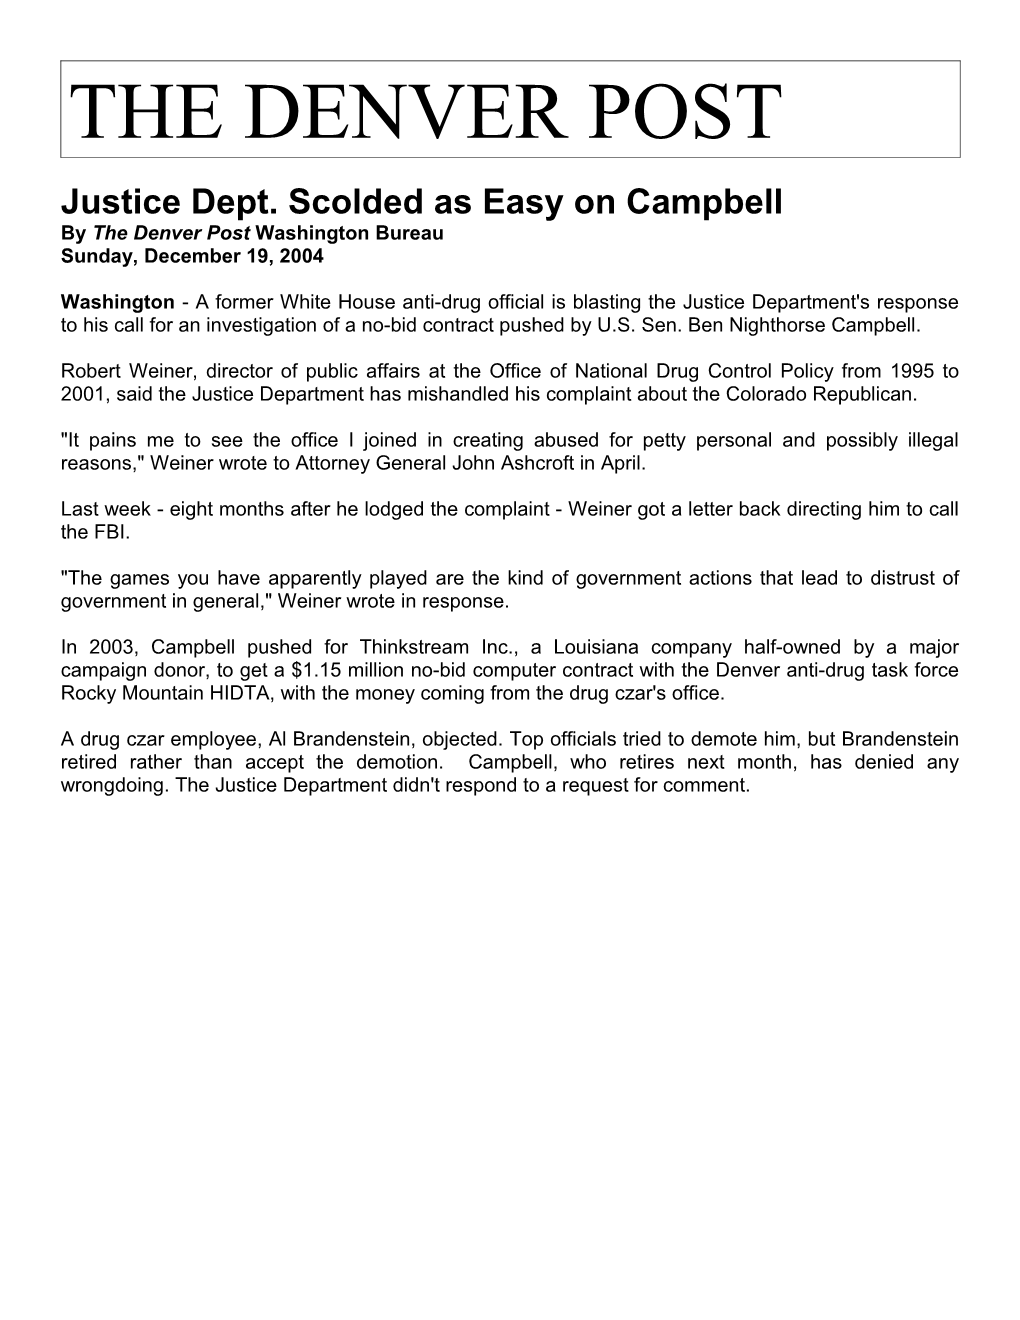 Justice Dept. Scolded As Easy on Campbell